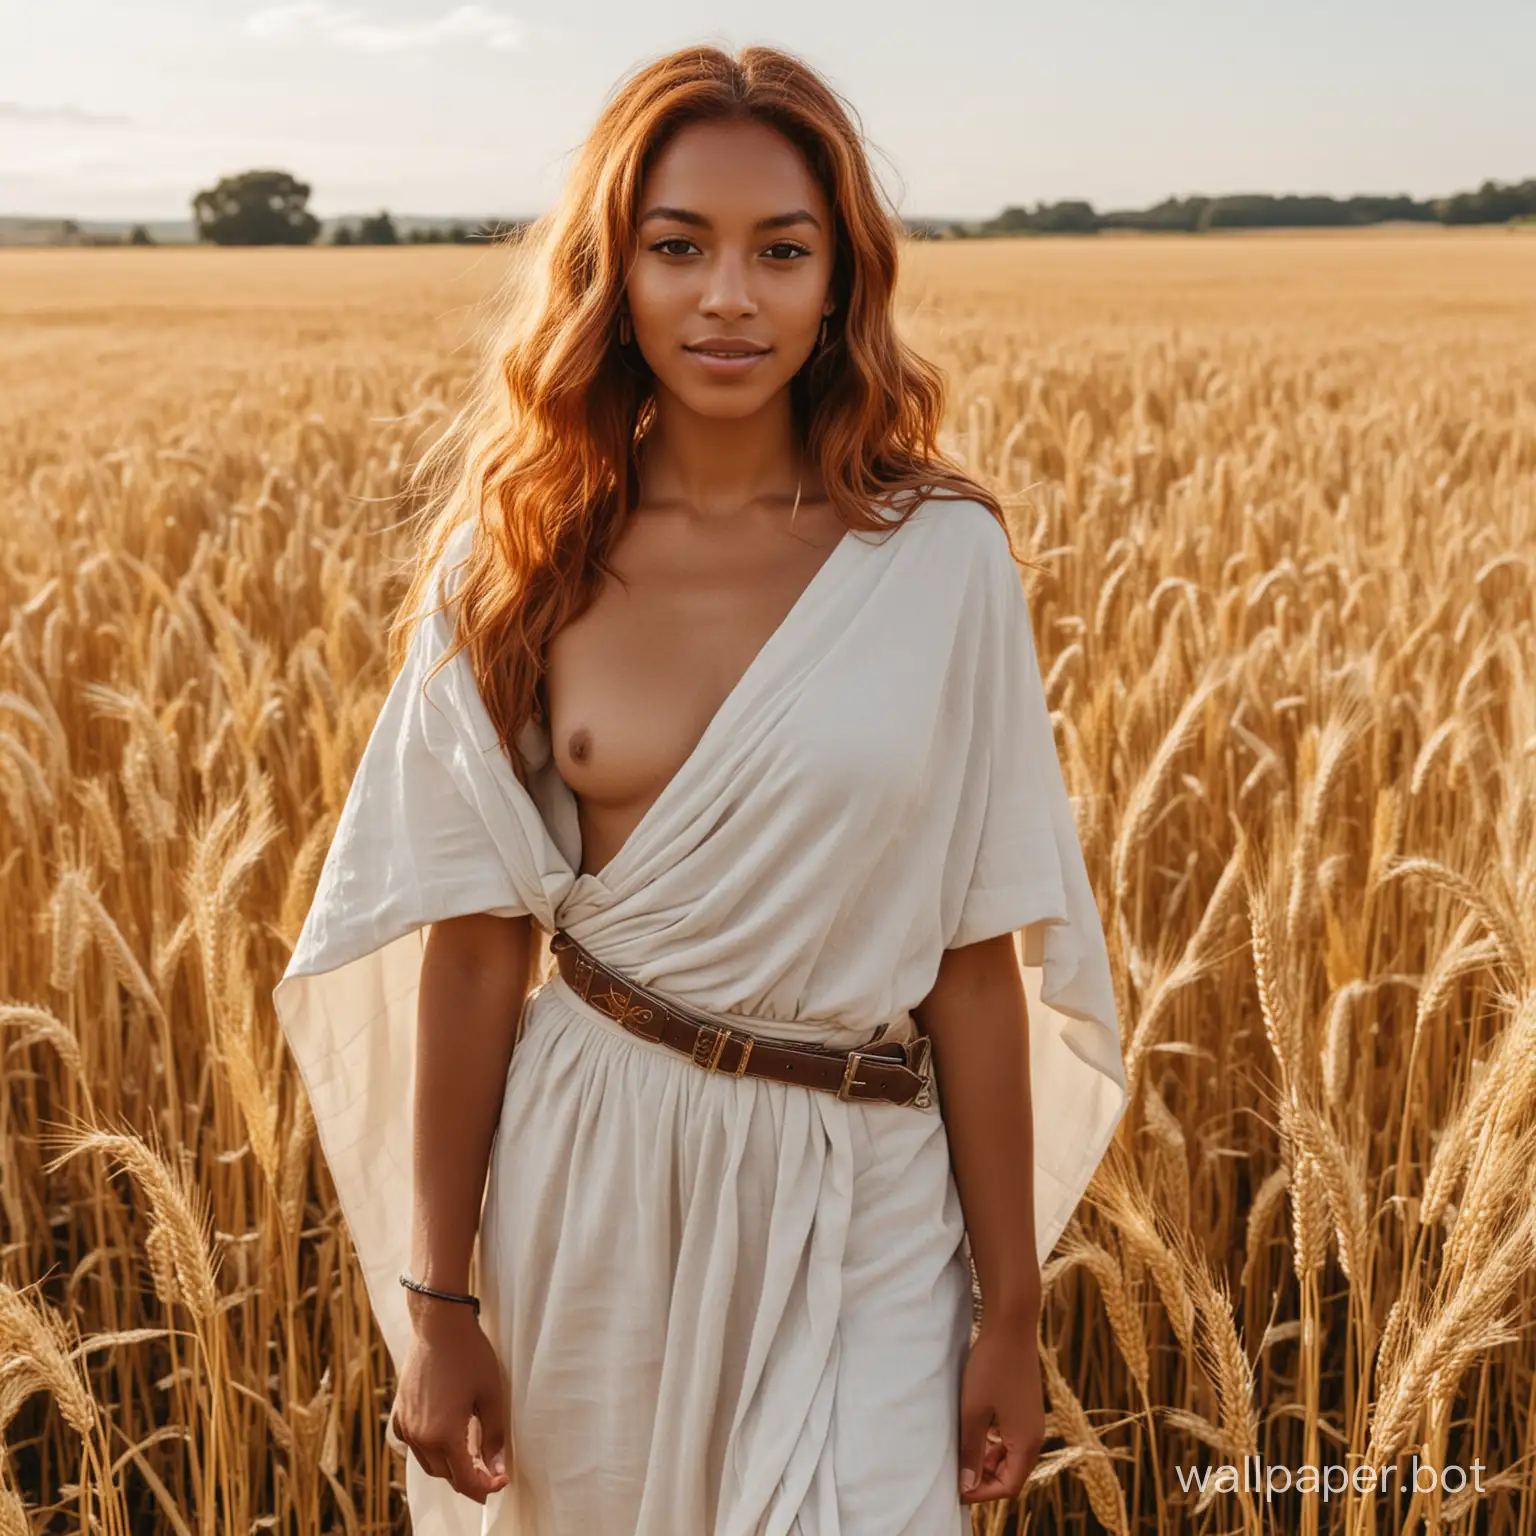 GingerHaired-Girl-in-Golden-Wheat-Field-Wearing-Toga-with-Buckle